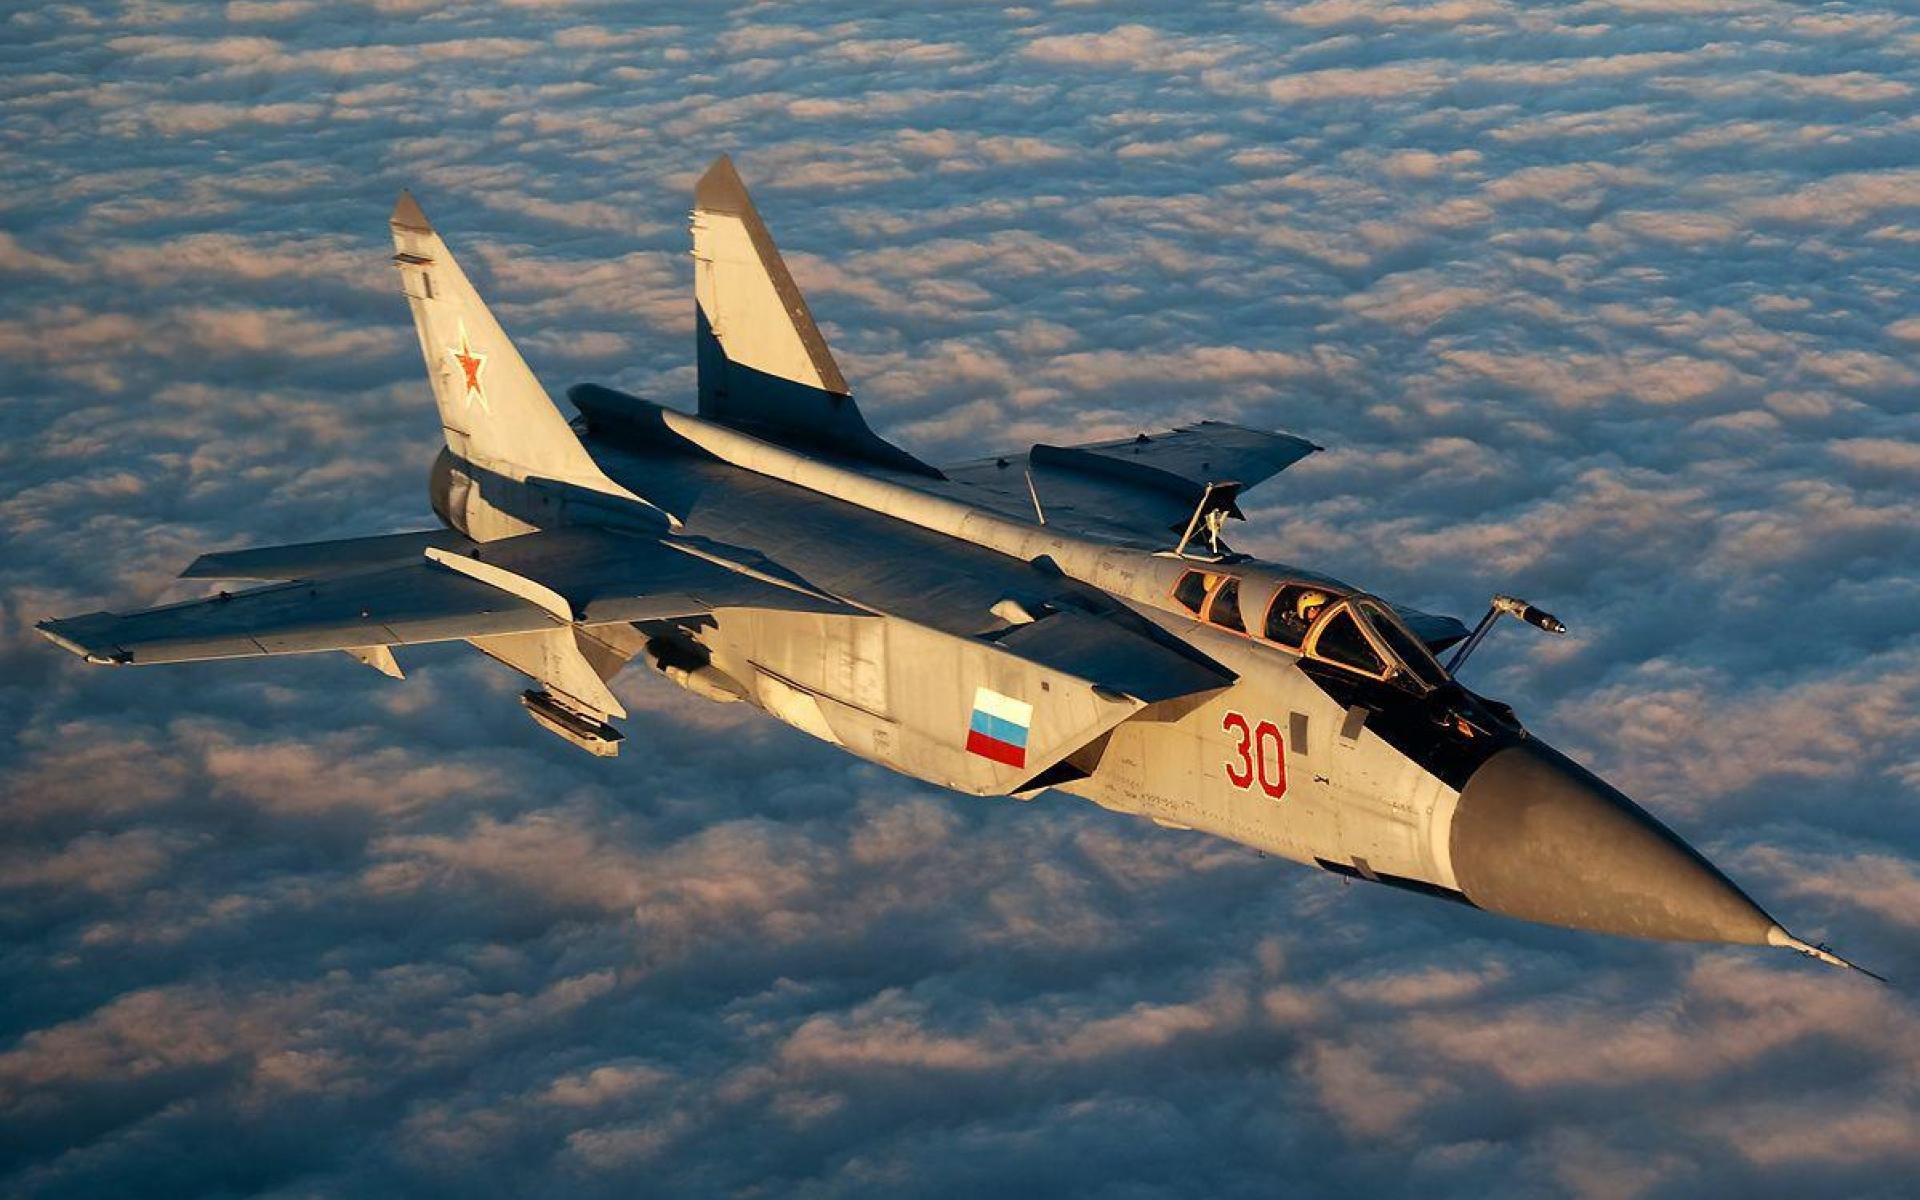 mig 31, Fighter, Jet, Military, Airplane, Plane, Russian